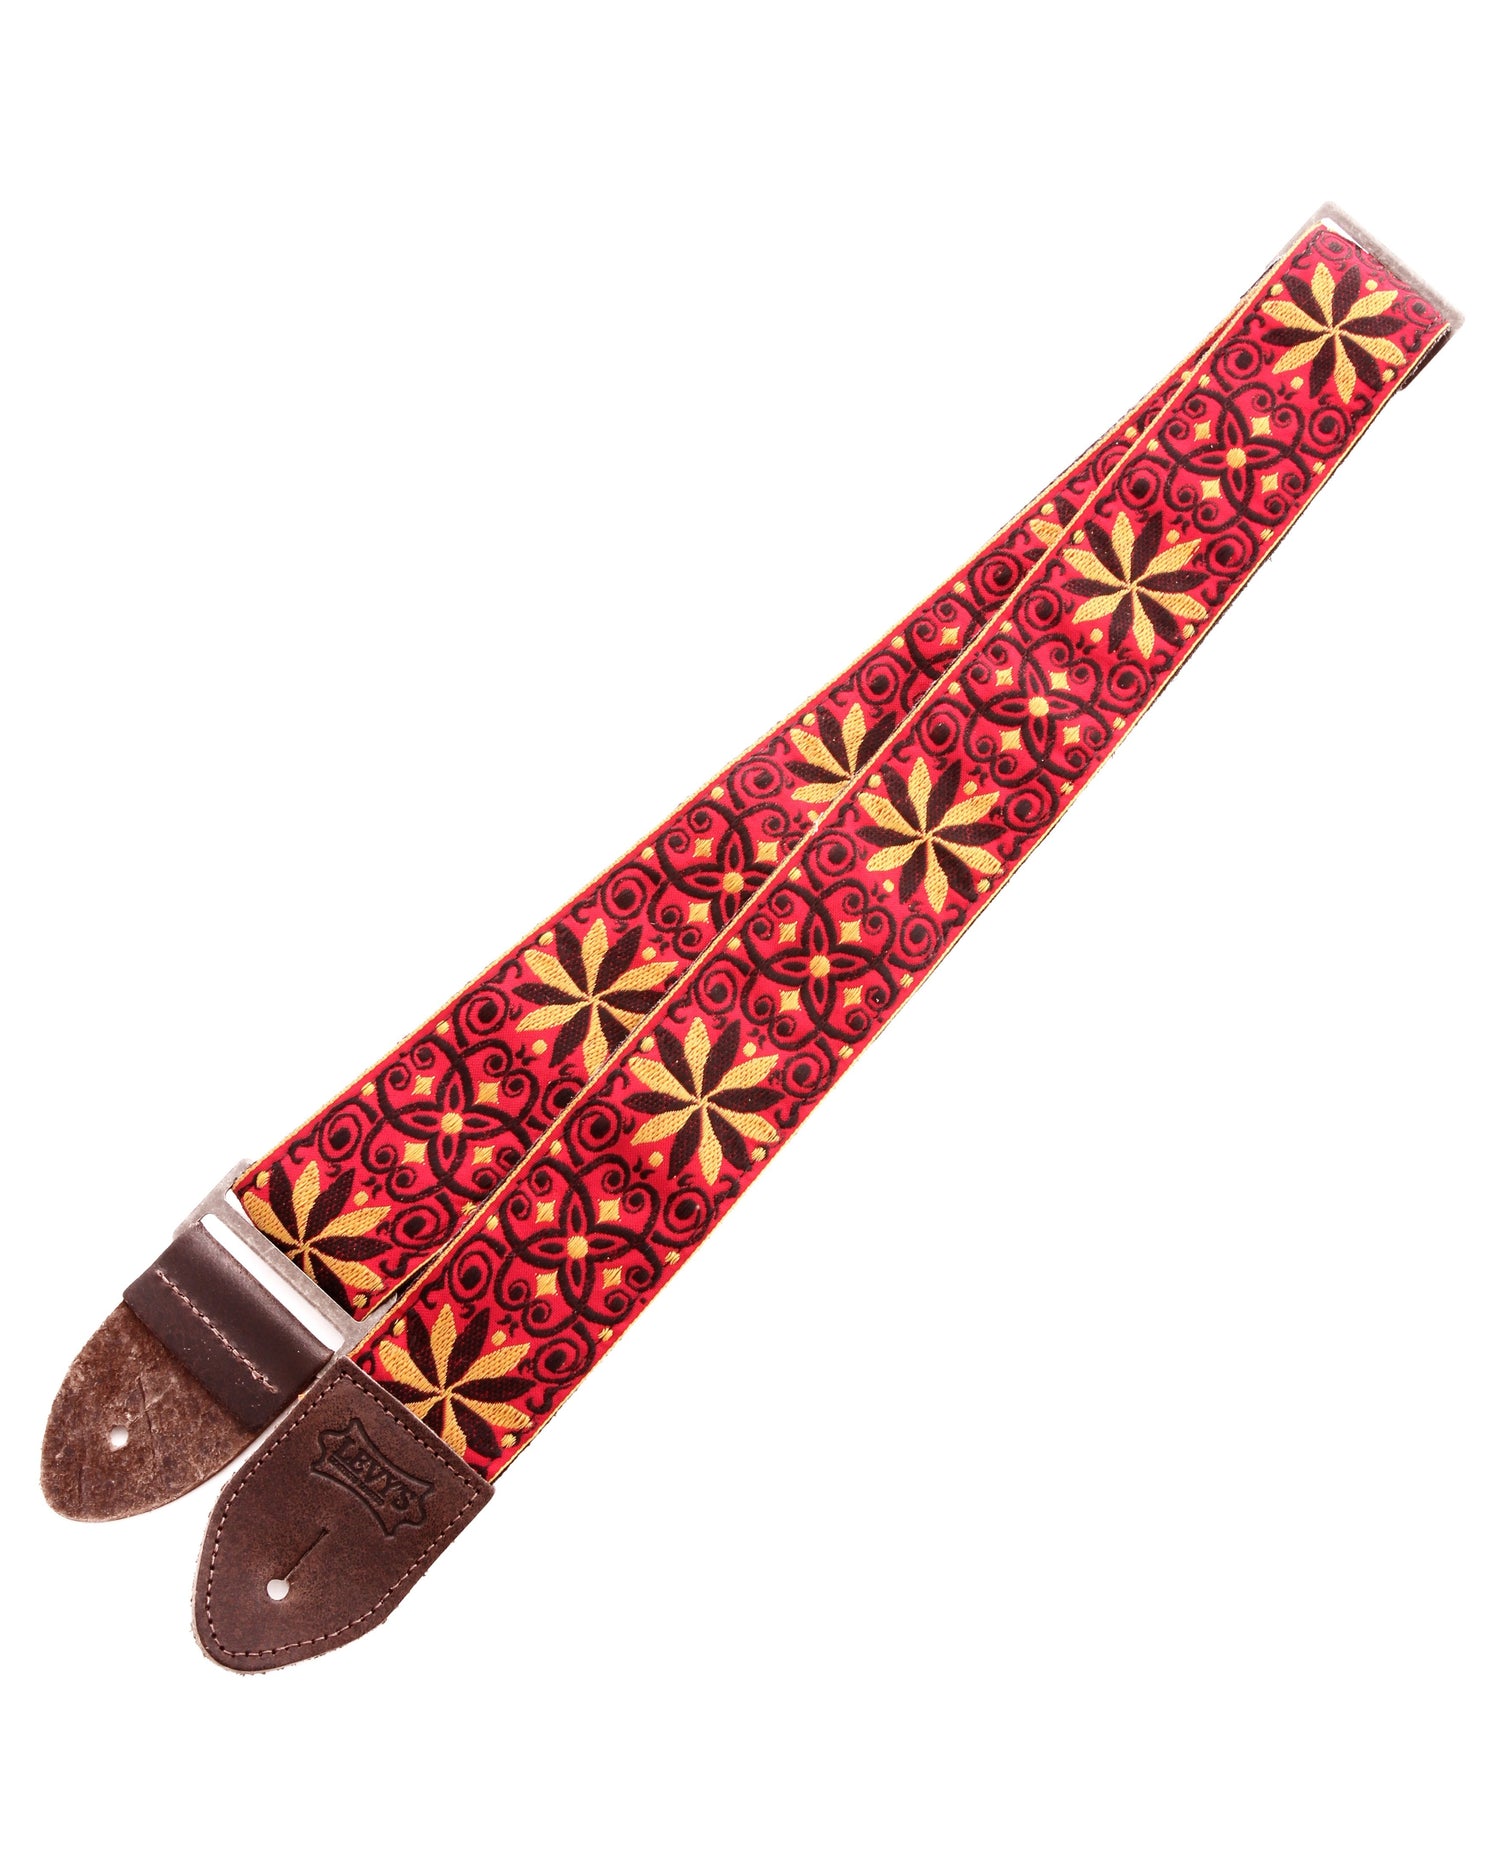 Image 1 of Levy 2" Jacquard Weave Guitar Strap with Hootenanny Design - SKU# M8HTV-21 : Product Type Accessories & Parts : Elderly Instruments